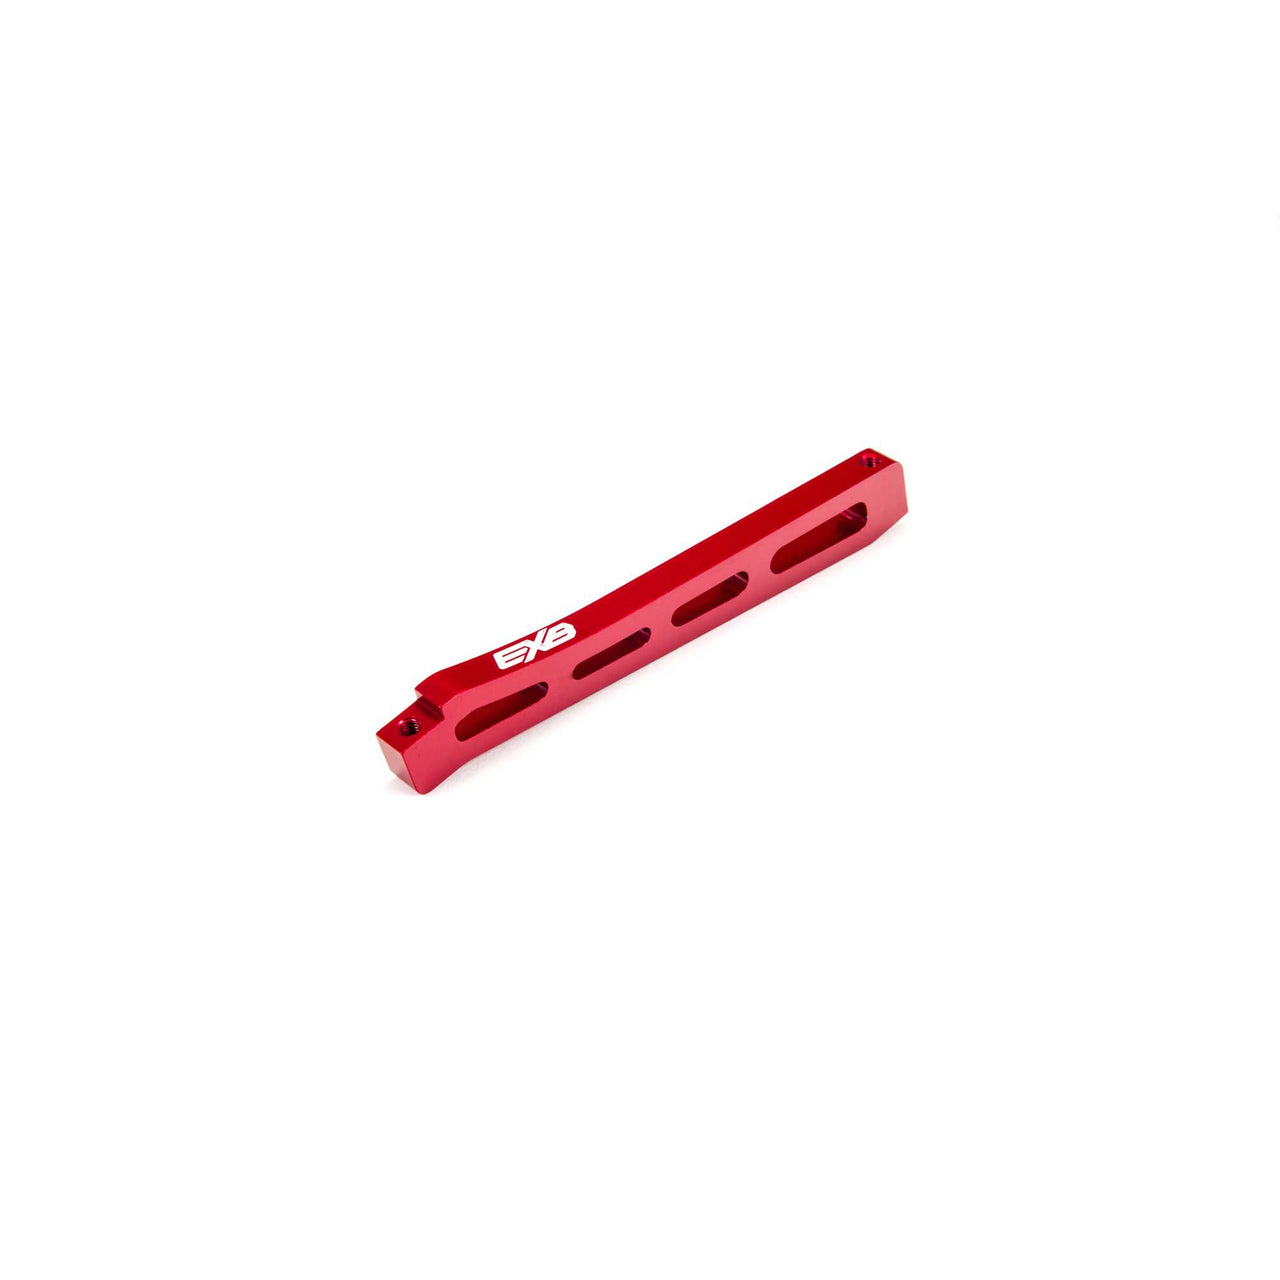 ARA320565 Front Center Aluminum Chassis Brace, 118mm Red: EXB